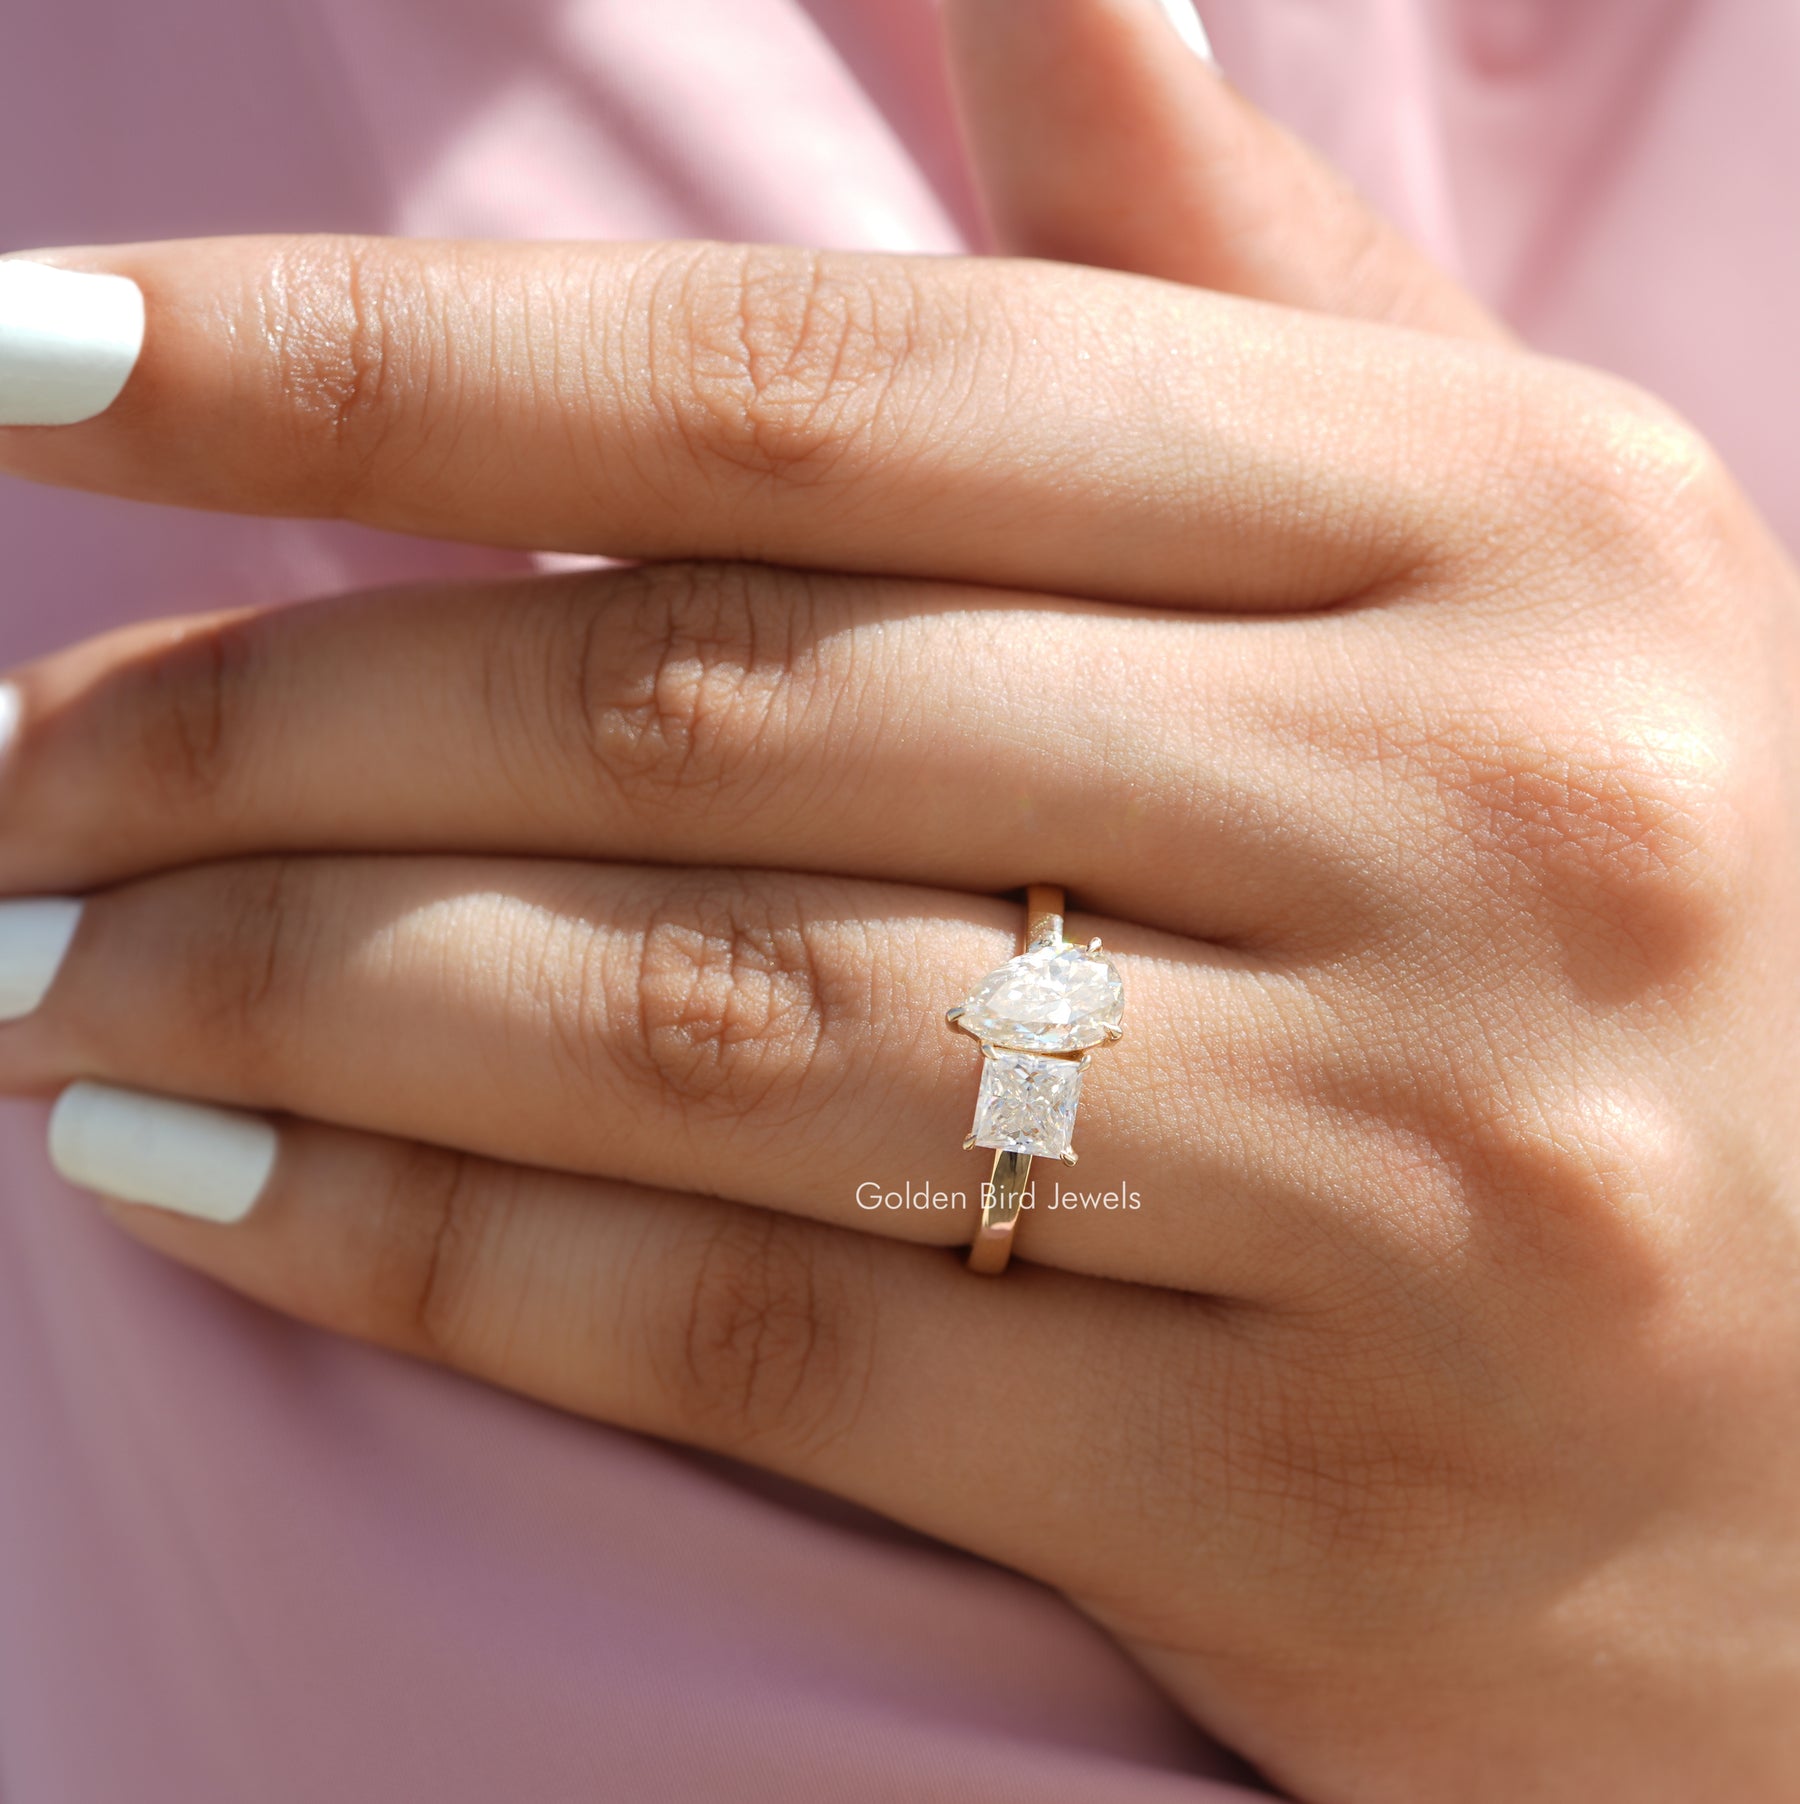 [In Finger a Moissanite Pear And Princess Cut Ring With Claw Prong Set]-[Golden Bird Jewels]